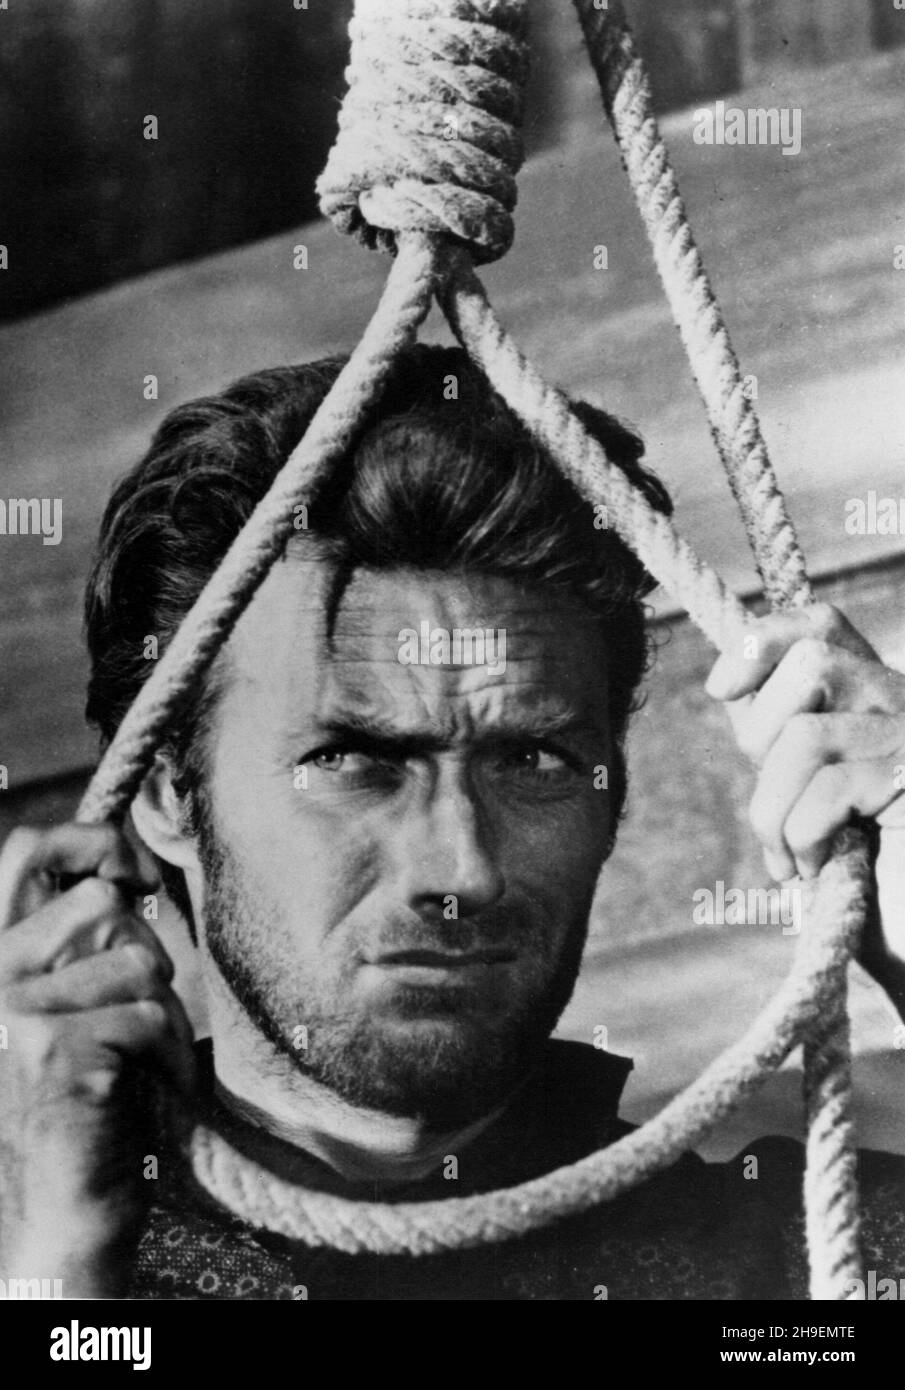 RELEASE DATE: 29 December 1967 TITLE: The Good, the Bad and the Ugly STUDIO: United Artists DIRECTOR: Sergio Leone PLOT: A bounty hunting scam joins two men in an uneasy alliance against a third in a race to find a fortune in gold buried in a remote cemetery. STARRING: CLINT EASTWOOD as Blondie. (Credit Image: ©United Artists/Entertainment Pictures) Stock Photo